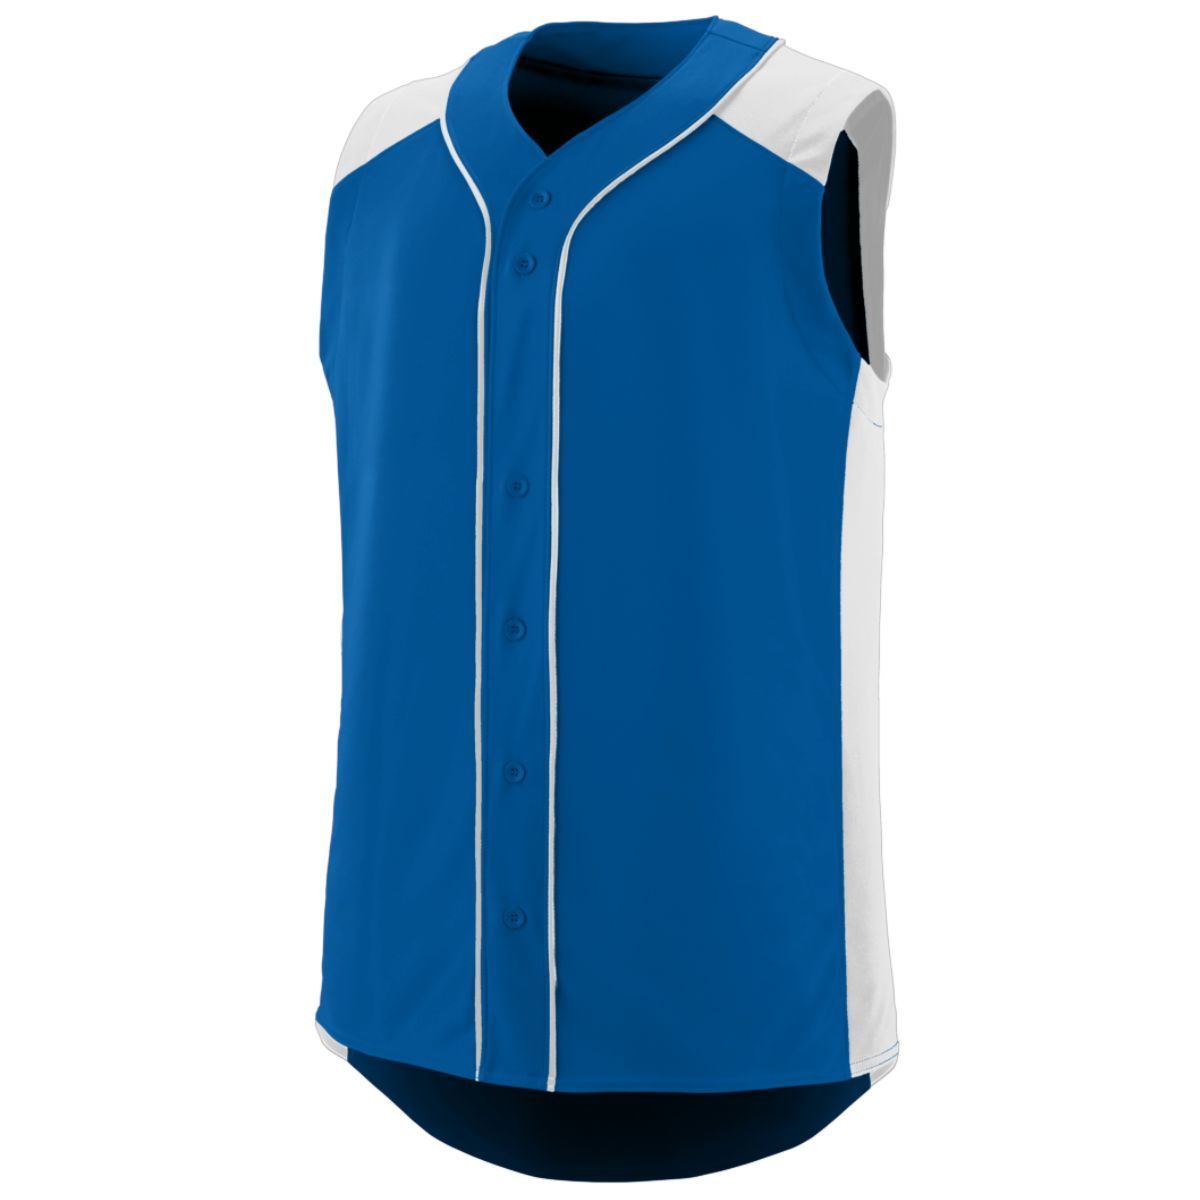 Augusta Sportswear Sleeveless Slugger Jersey in Royal/White  -Part of the Adult, Adult-Jersey, Augusta-Products, Baseball, Shirts, All-Sports, All-Sports-1 product lines at KanaleyCreations.com